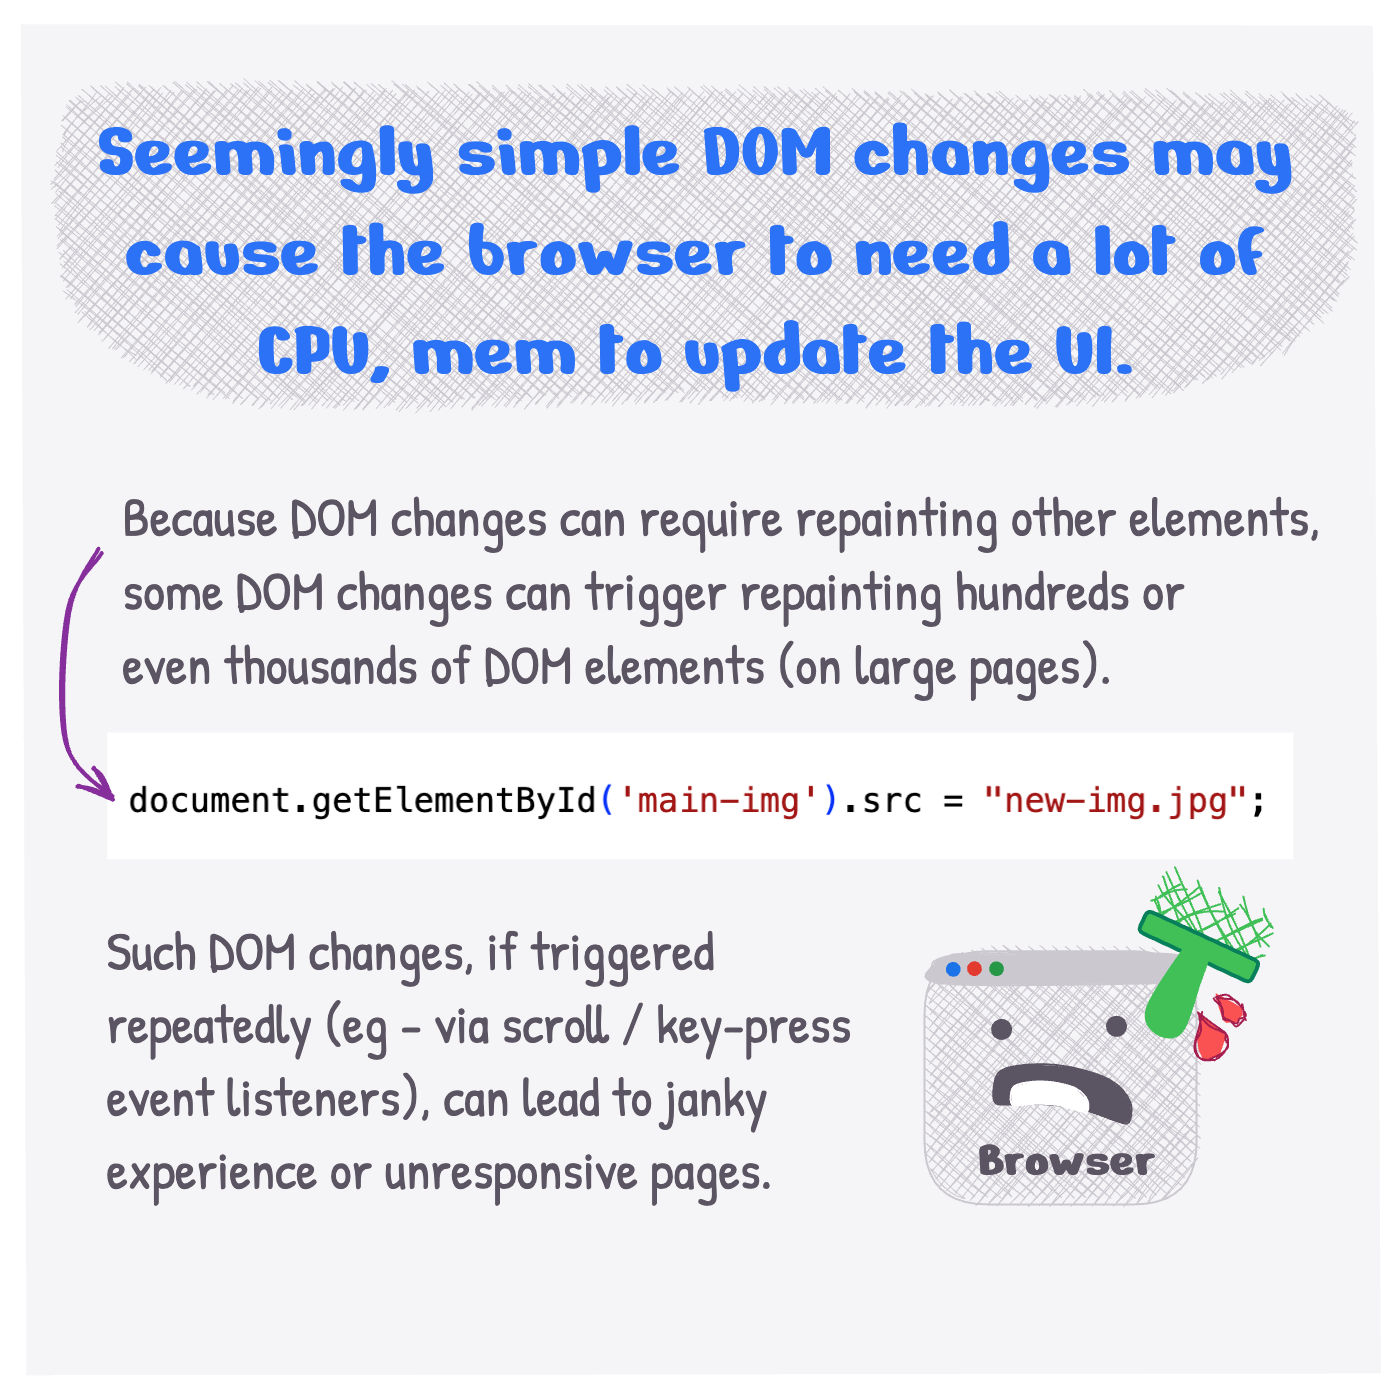 Seemingly simple DOM changes may cause the browser to need a lot of CPU, mem to update the UI. Because DOM changes can require repainting other elements, some DOM changes can trigger repainting hundreds or even thousands of DOM elements (on large pages). Such DOM changes, if triggered repeatedly (eg - via scroll / key-press event listeners), can lead to janky experience or unresponsive pages.